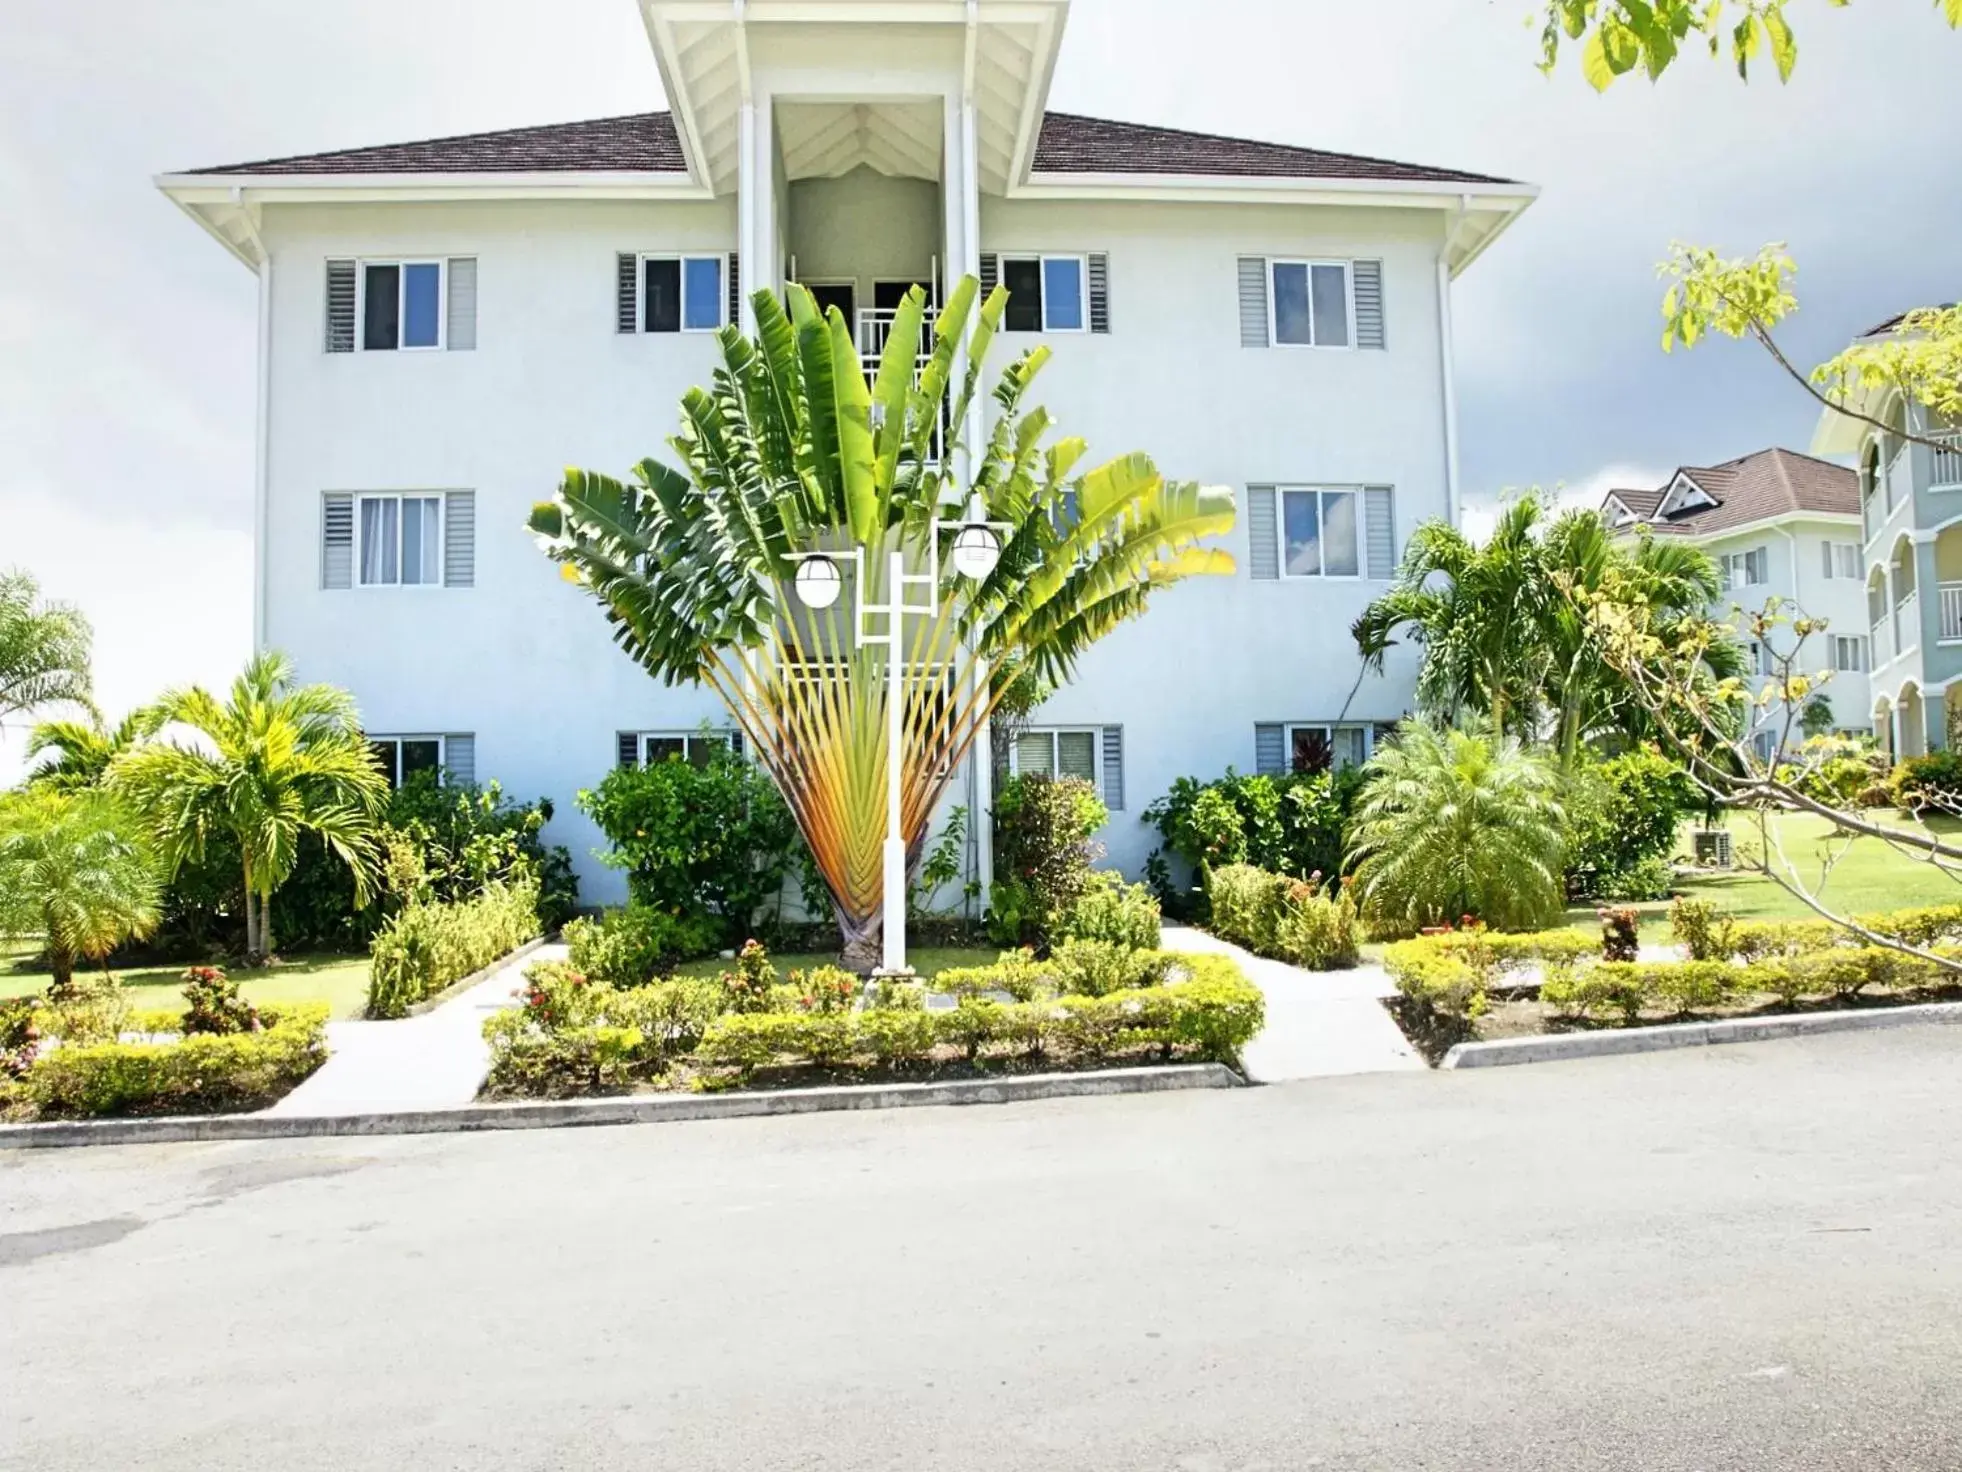 Two-Bedroom Apartment in Jamnick Vacation Rentals - Richmond, St Ann, Jamaica